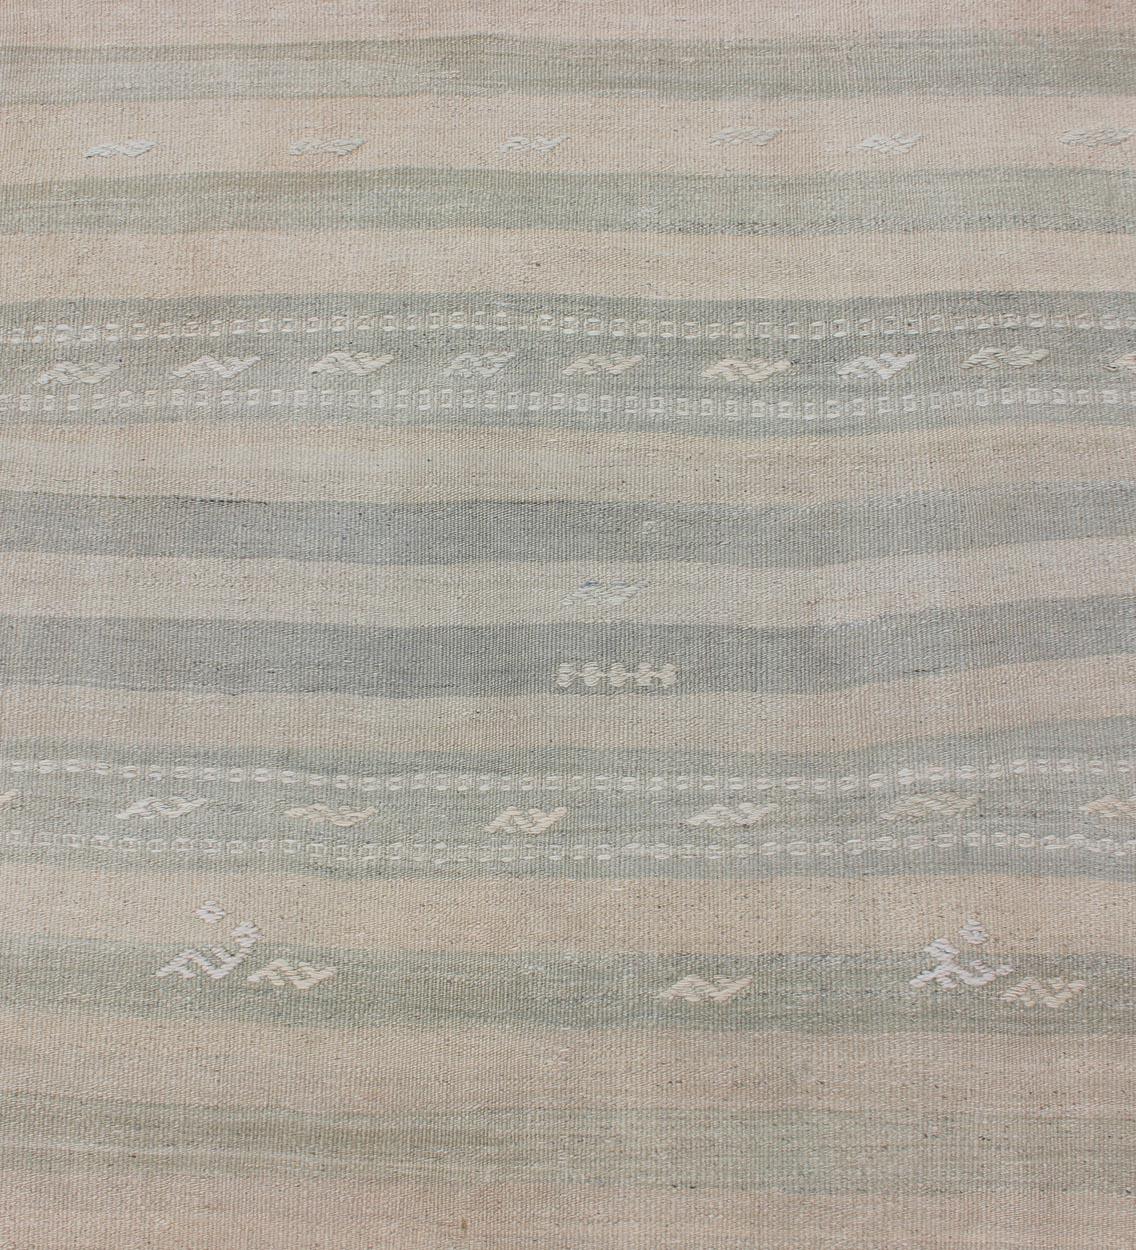 Wool Vintage Turkish Kilim Runner with Stripes in Light Taupe and Neutral Tones For Sale